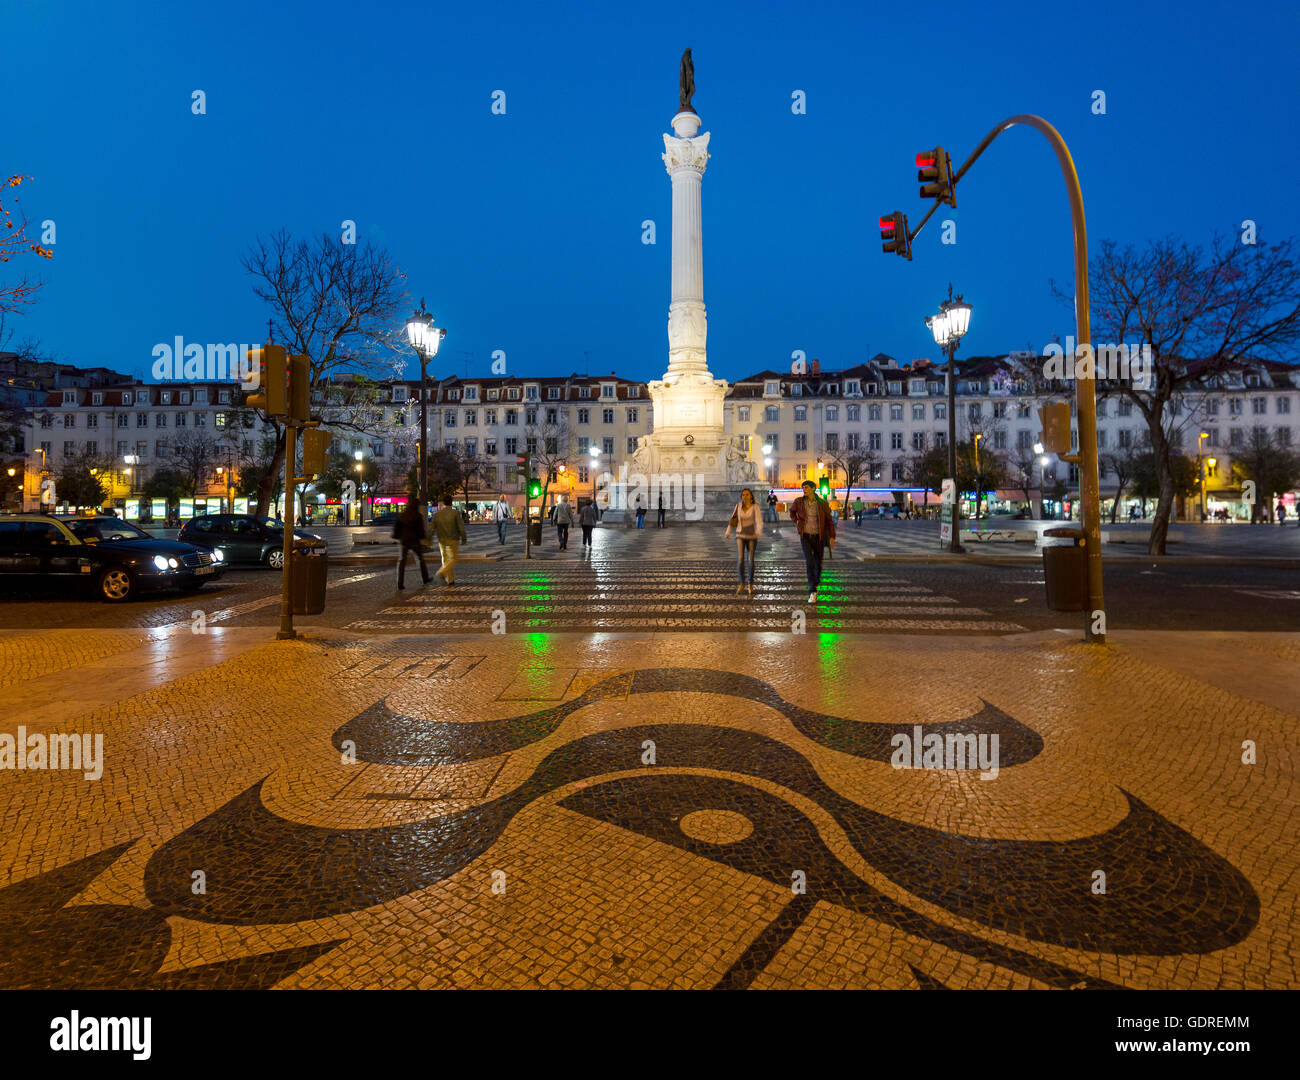 Monument, Rossio Square, paving stones in waveform, wave pattern, night scene, blue hour, Lisbon, District of Lisbon, Portugal, Stock Photo